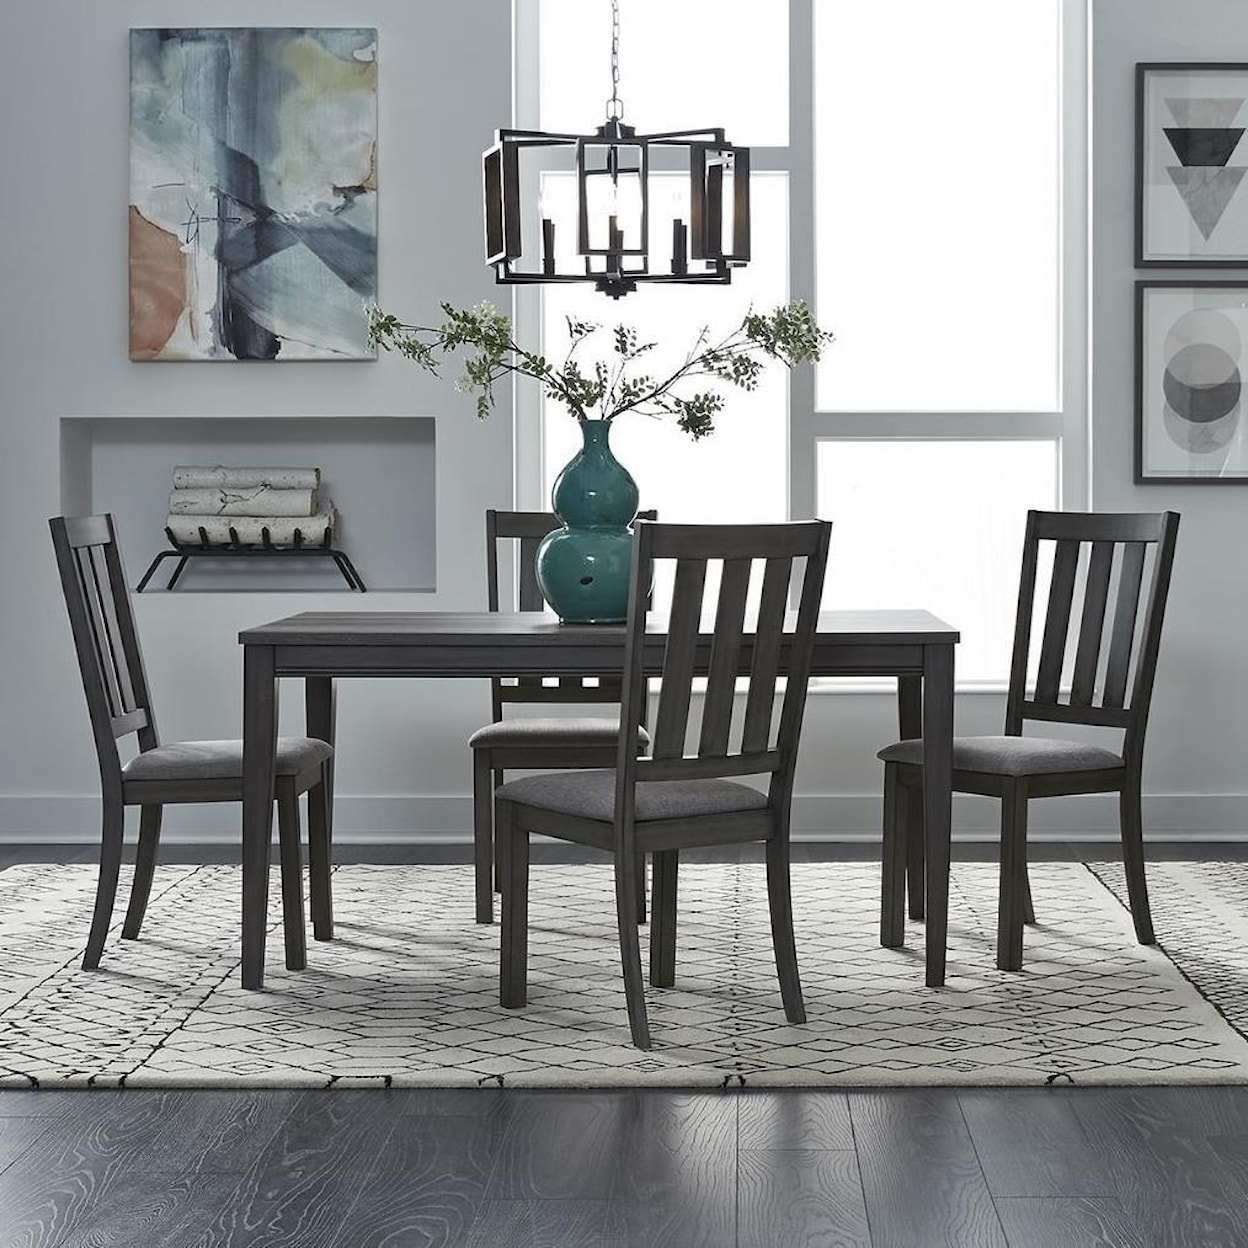 Liberty Furniture Tanners Creek 5 Piece Table and Chair Set